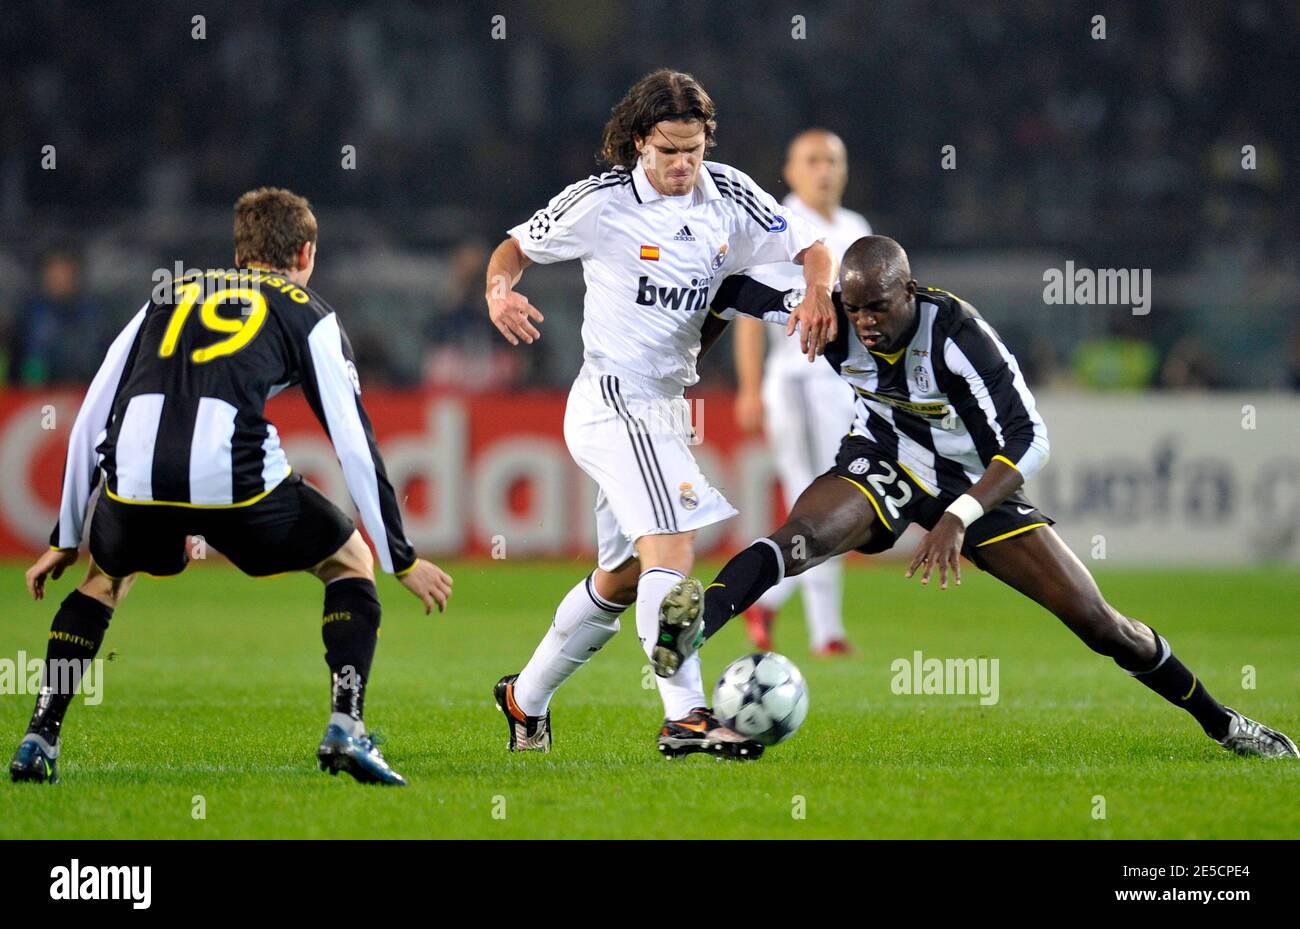 Juventus' Mohamed Sissoko and Real Madrid's Fernando Gago during the Champions League soccer match, Juventus FC vs Real Madrid CF at the Olympic stadium in Turin, Italy on October 21, 2008. Juventus won 2-1. Photo by Stephane Reix/ABACAPRESS.COM Stock Photo